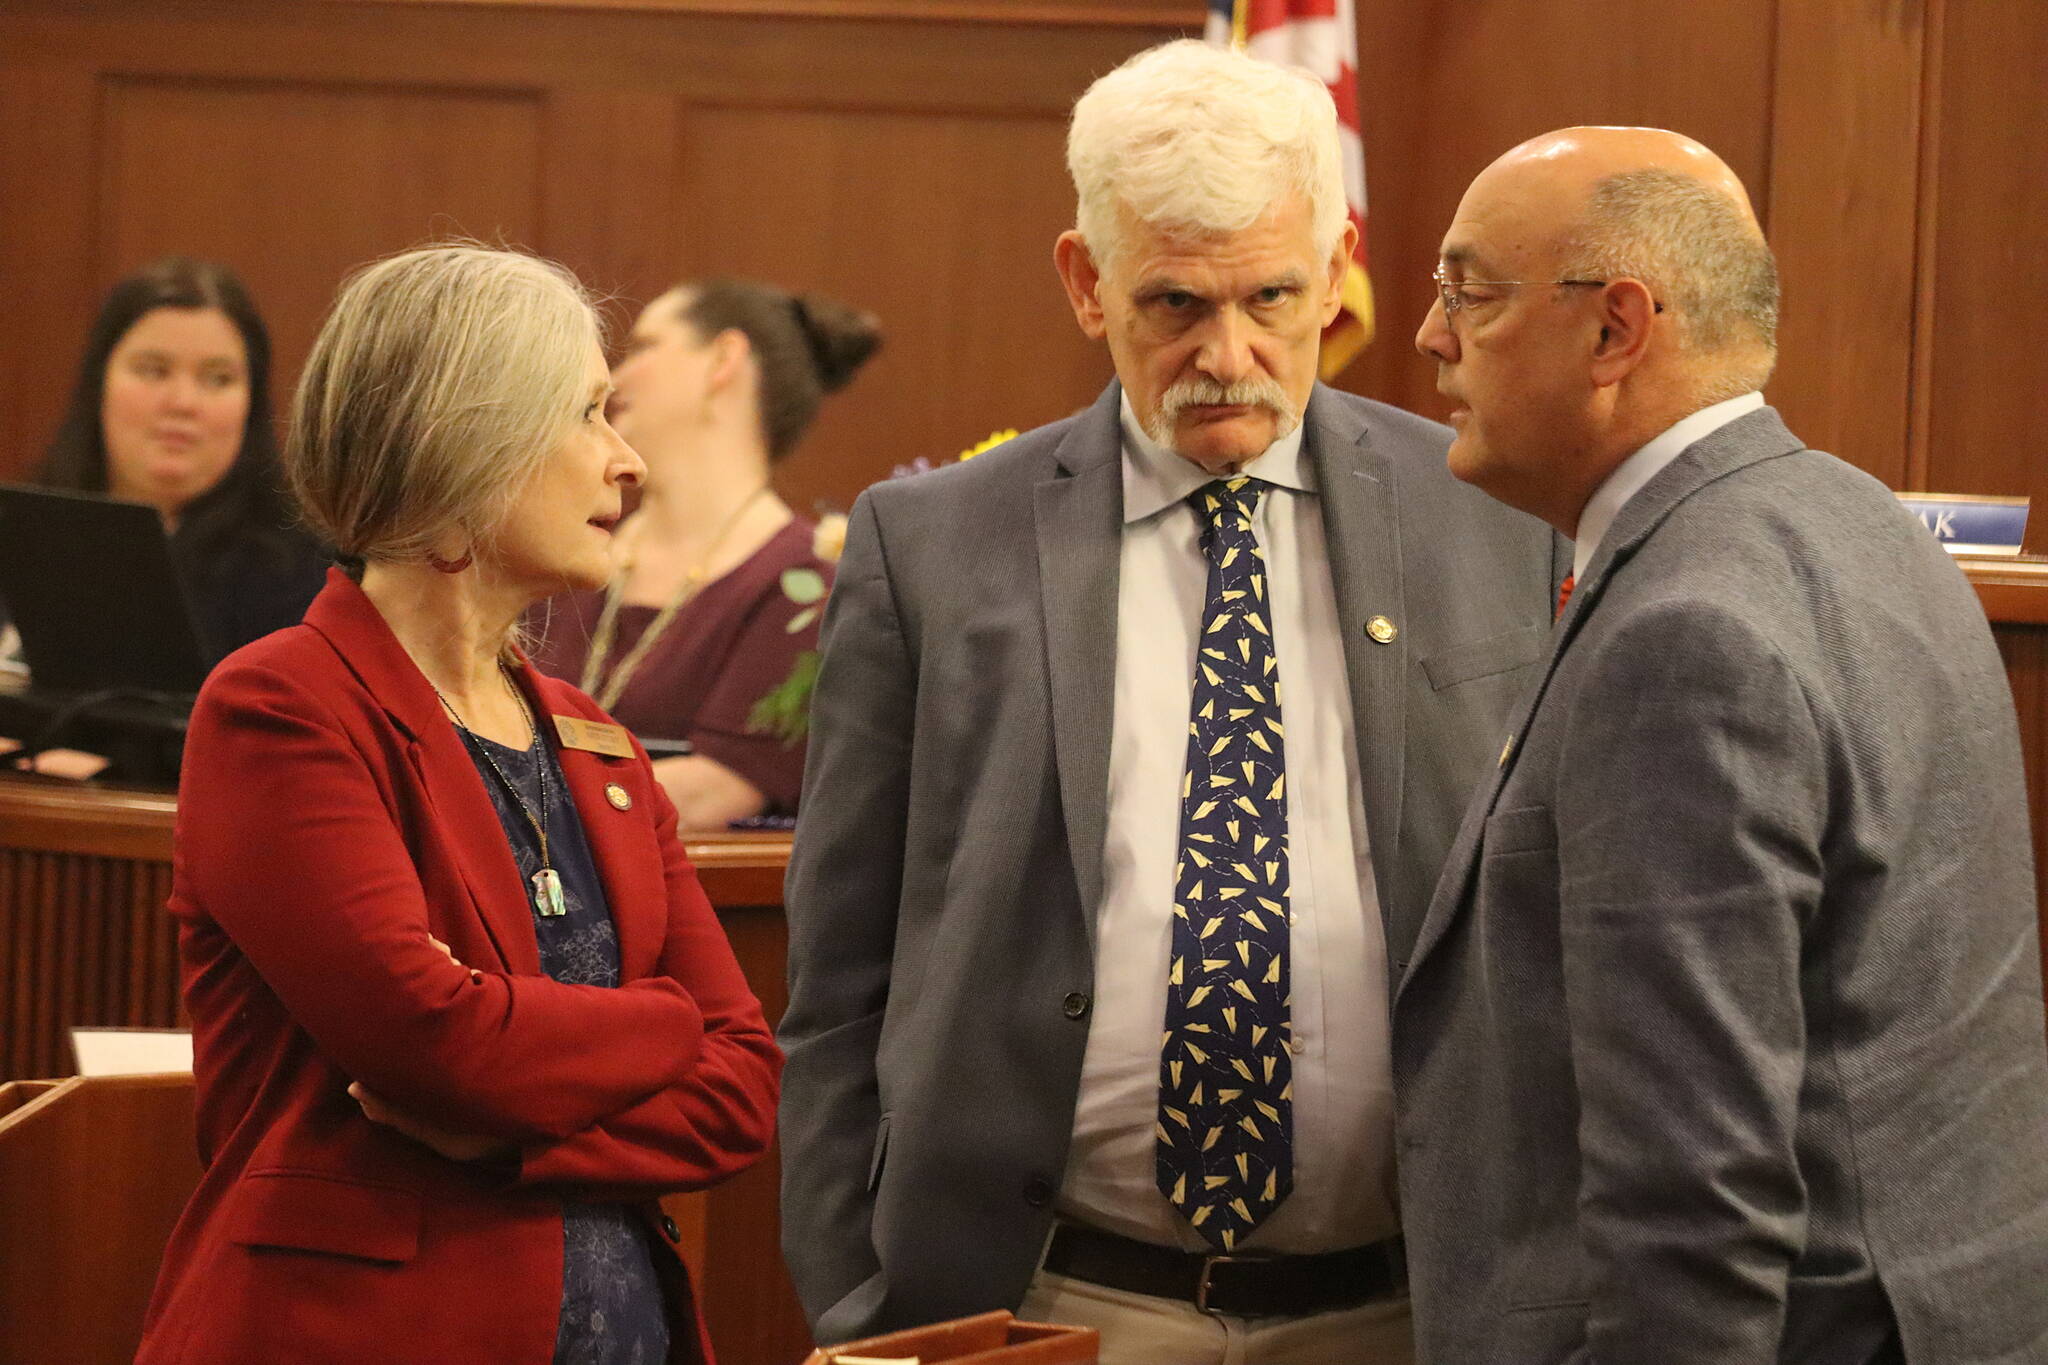 State Rep. Andi Story, D-Juneau, meets with representatives Cliff Groh, D-Anchorge, and Andy Josephson, D-Anchorage, during a break in the House floor session Wednesday. Story was one of two Democrats to vote for Rep. Cathy Tilton, R-Wasilla, as speaker, although the Juneau lawmaker is not part of the current majority.(Mark Sabbatini / Juneau Empire)